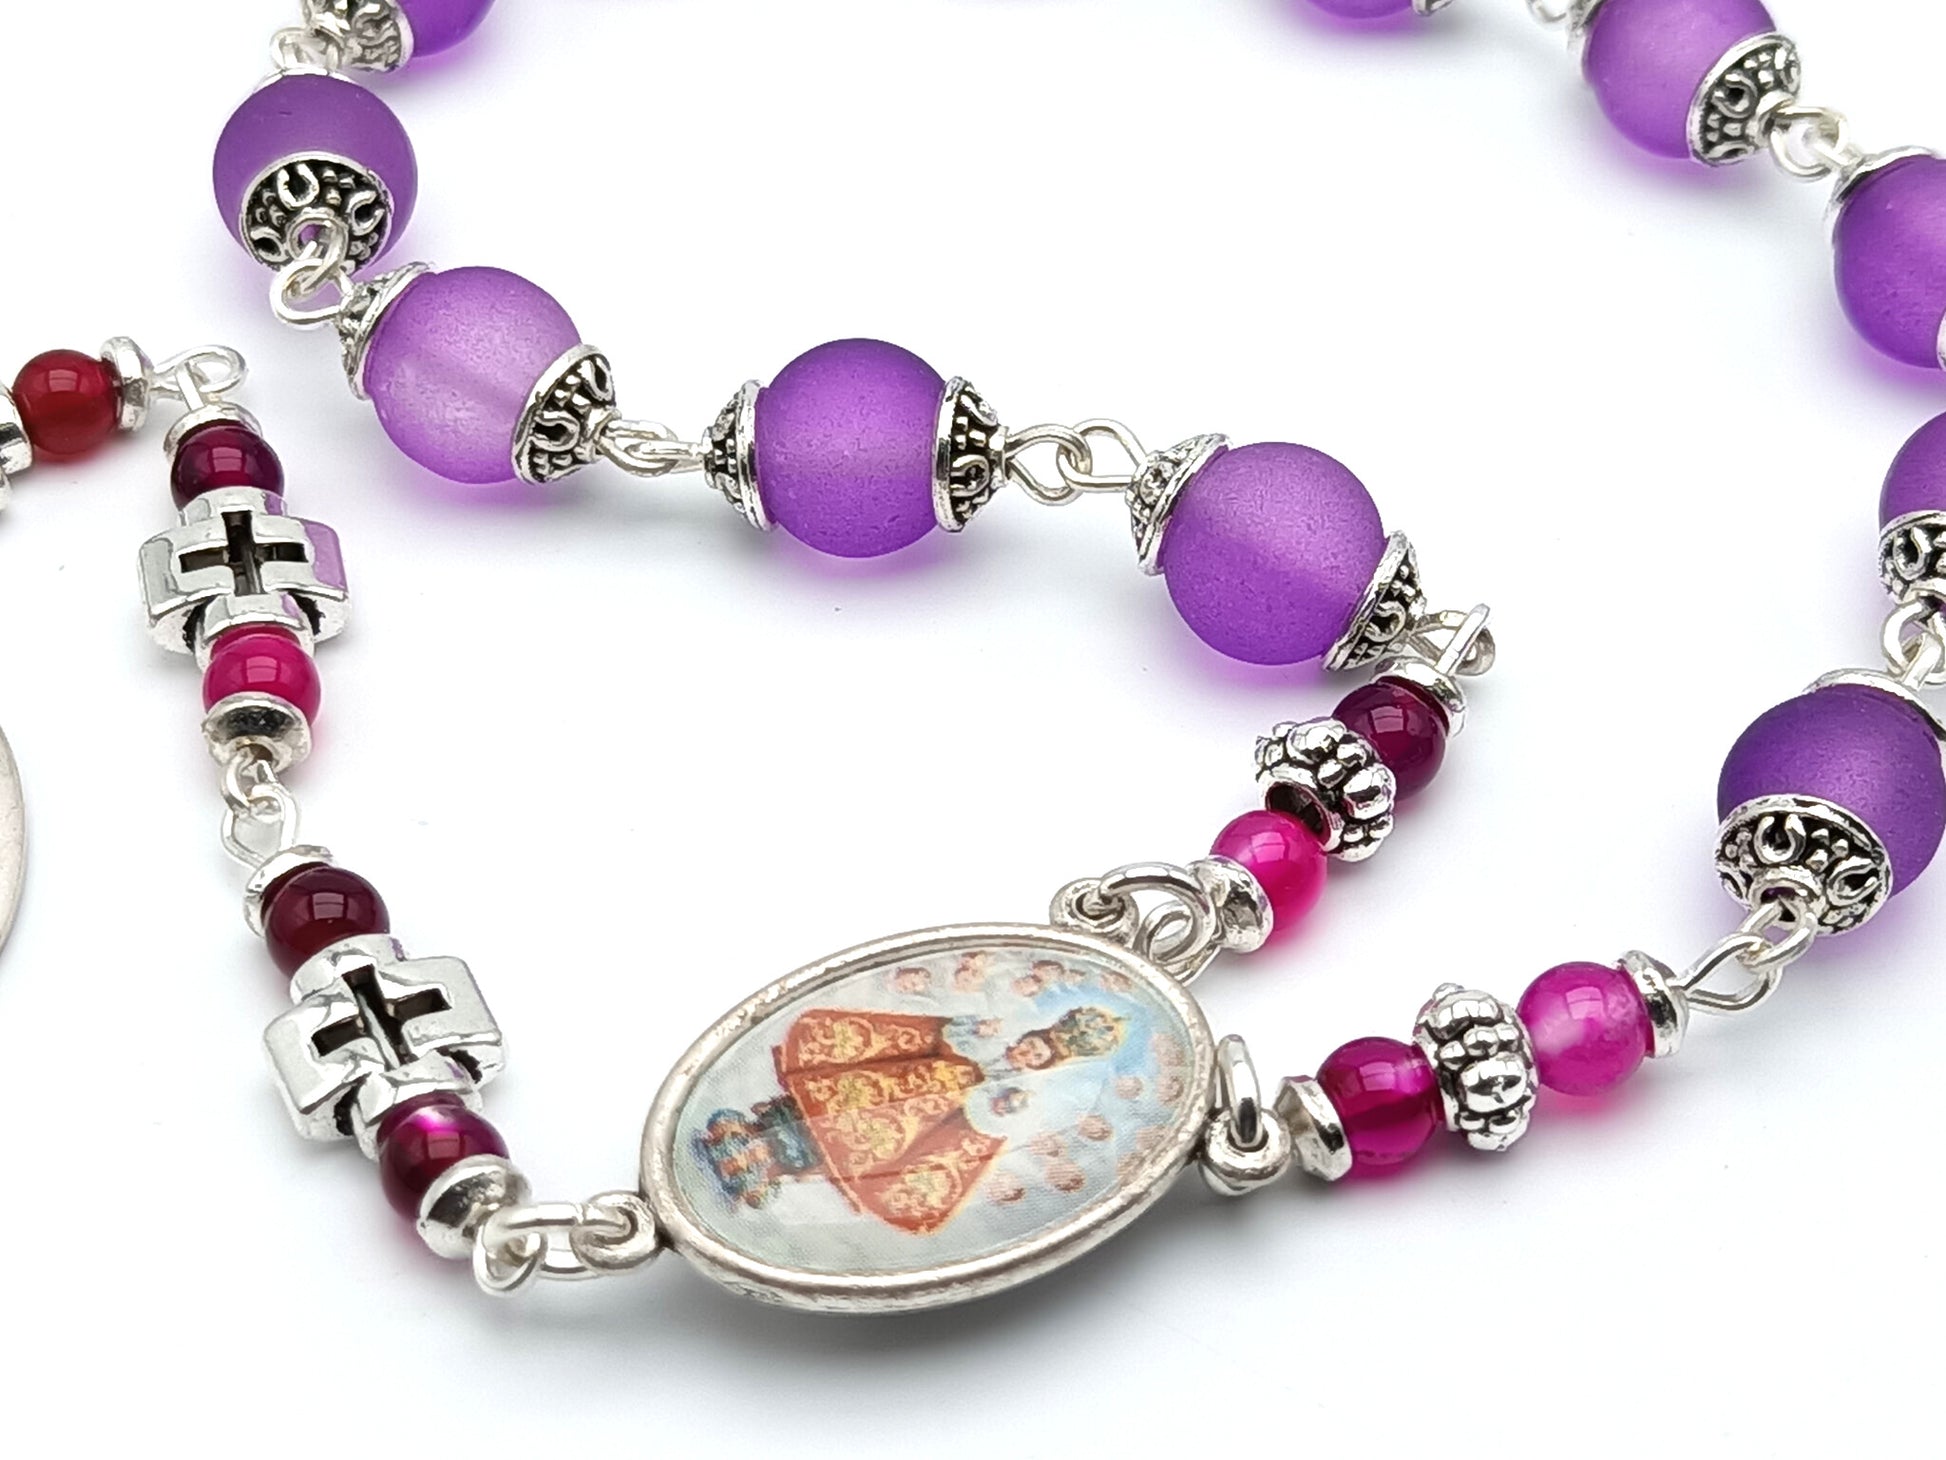 Infant of Prague unique rosary beads prayer chaplet with purple glass and silver beads, picture medal and Our Lady of Good Council medal.